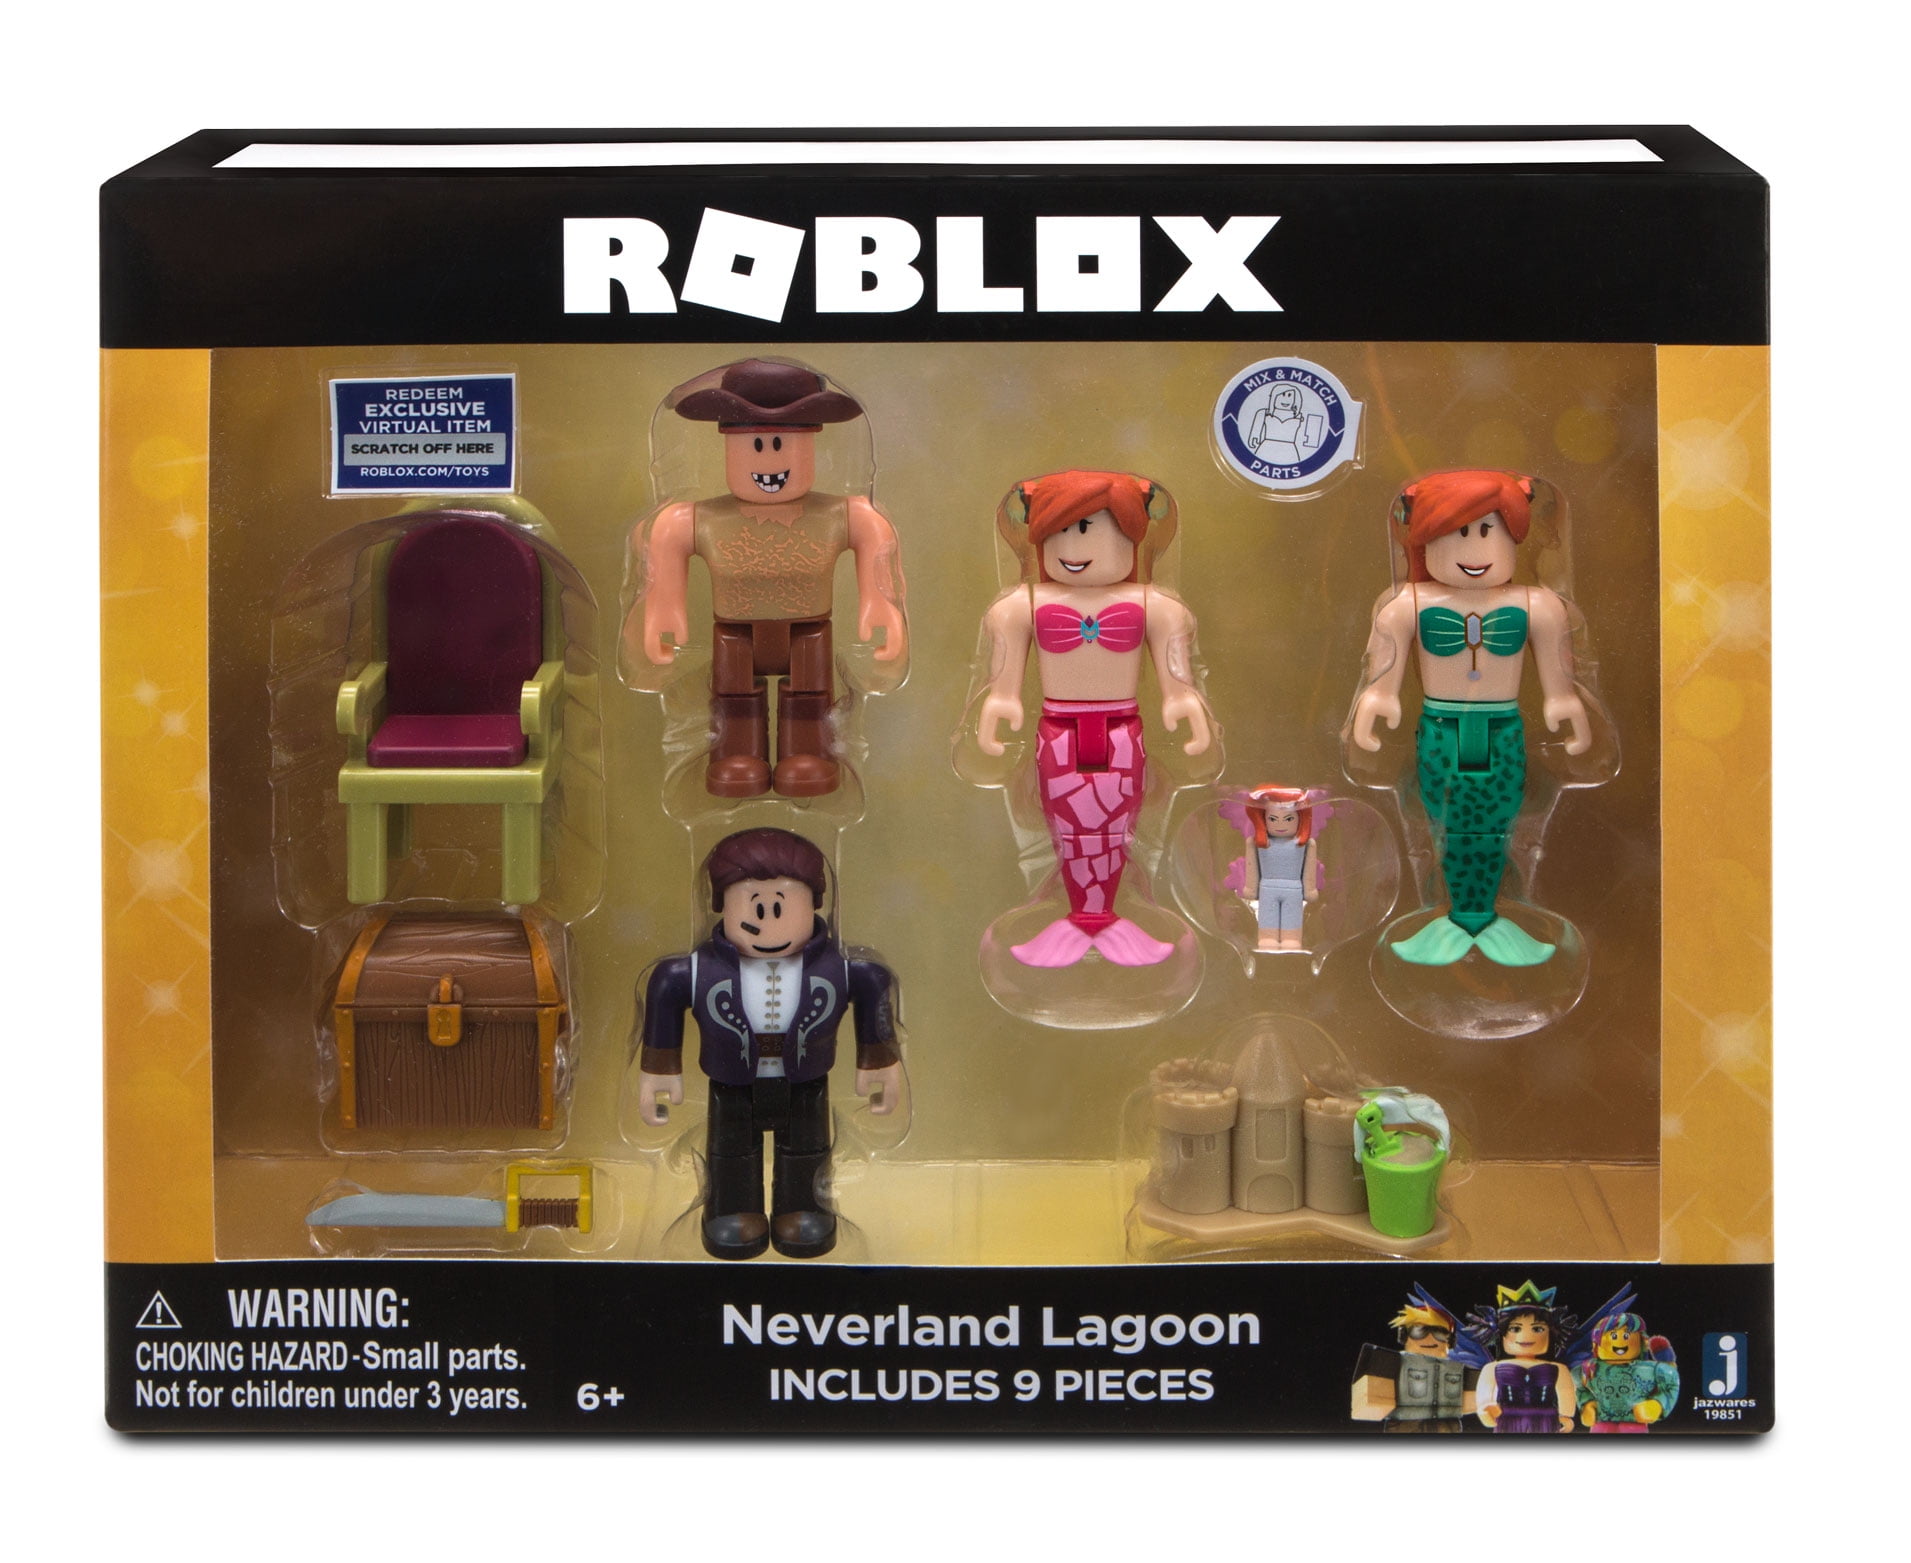 Roblox Celebrity Neverland Lagoon Four Figure Pack - 